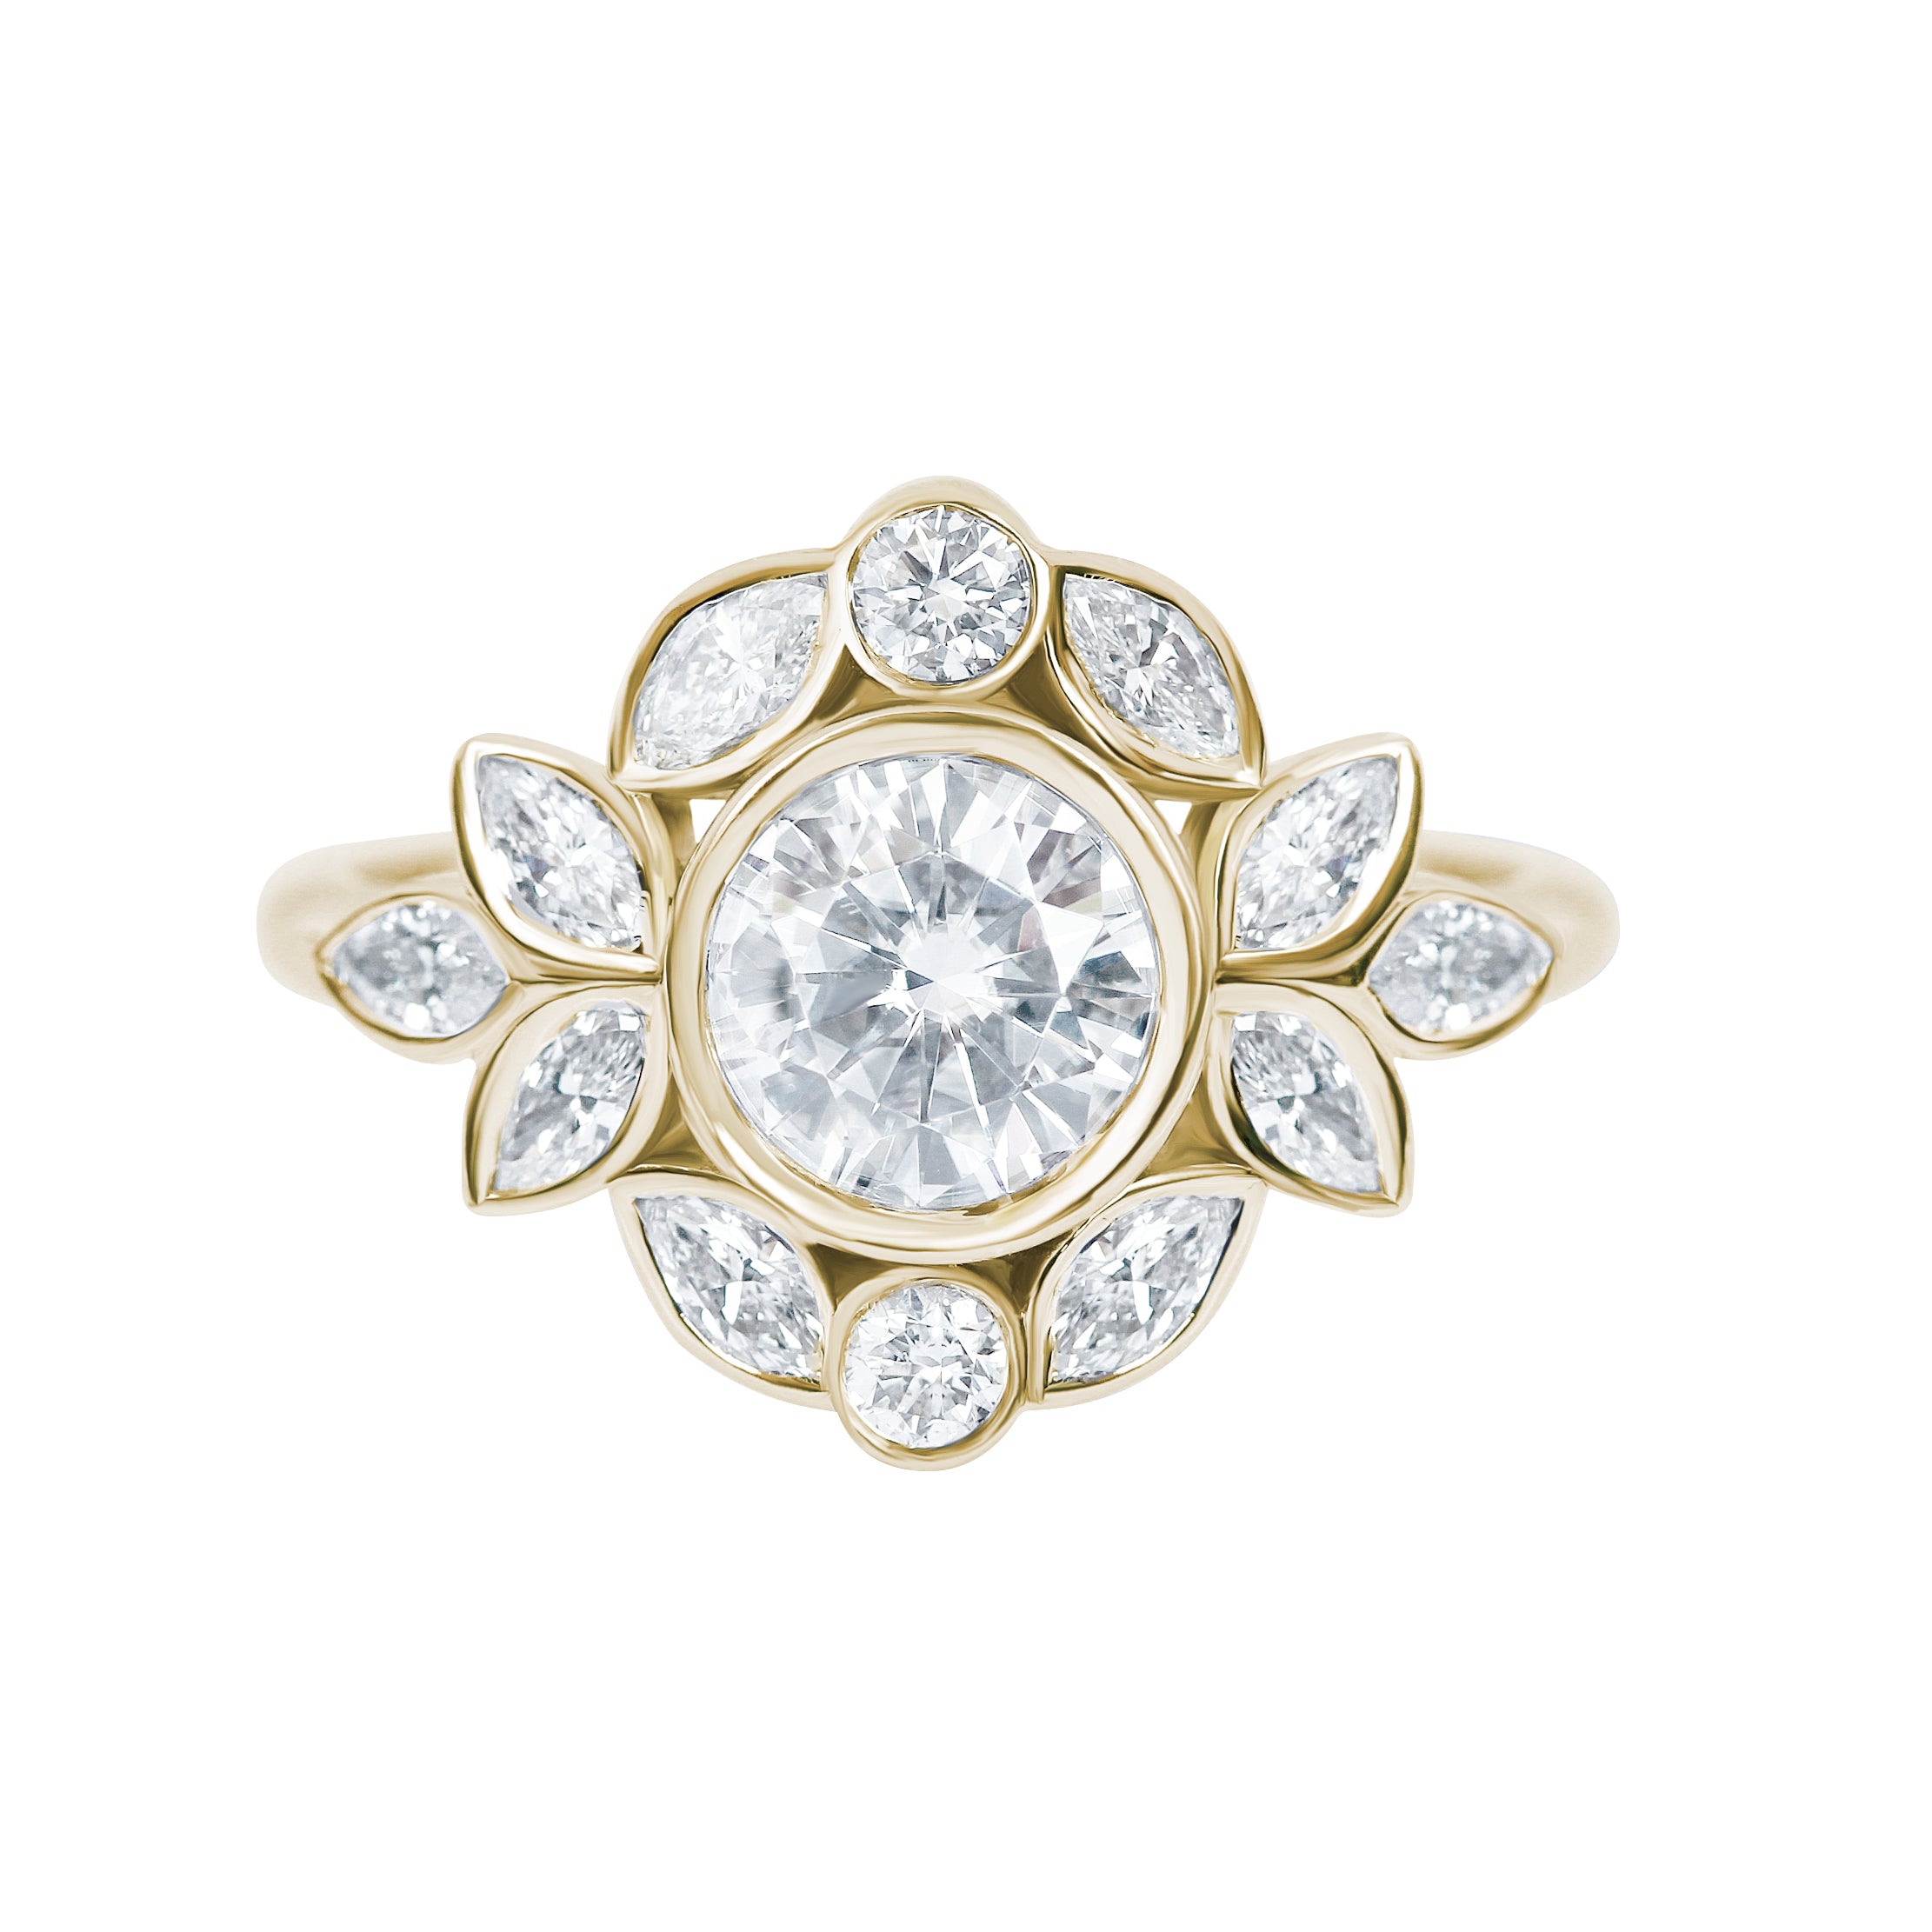 Bezel Diamond Flower Engagement Ring Set with Gold Ring Guard "Lily Emma" ♥